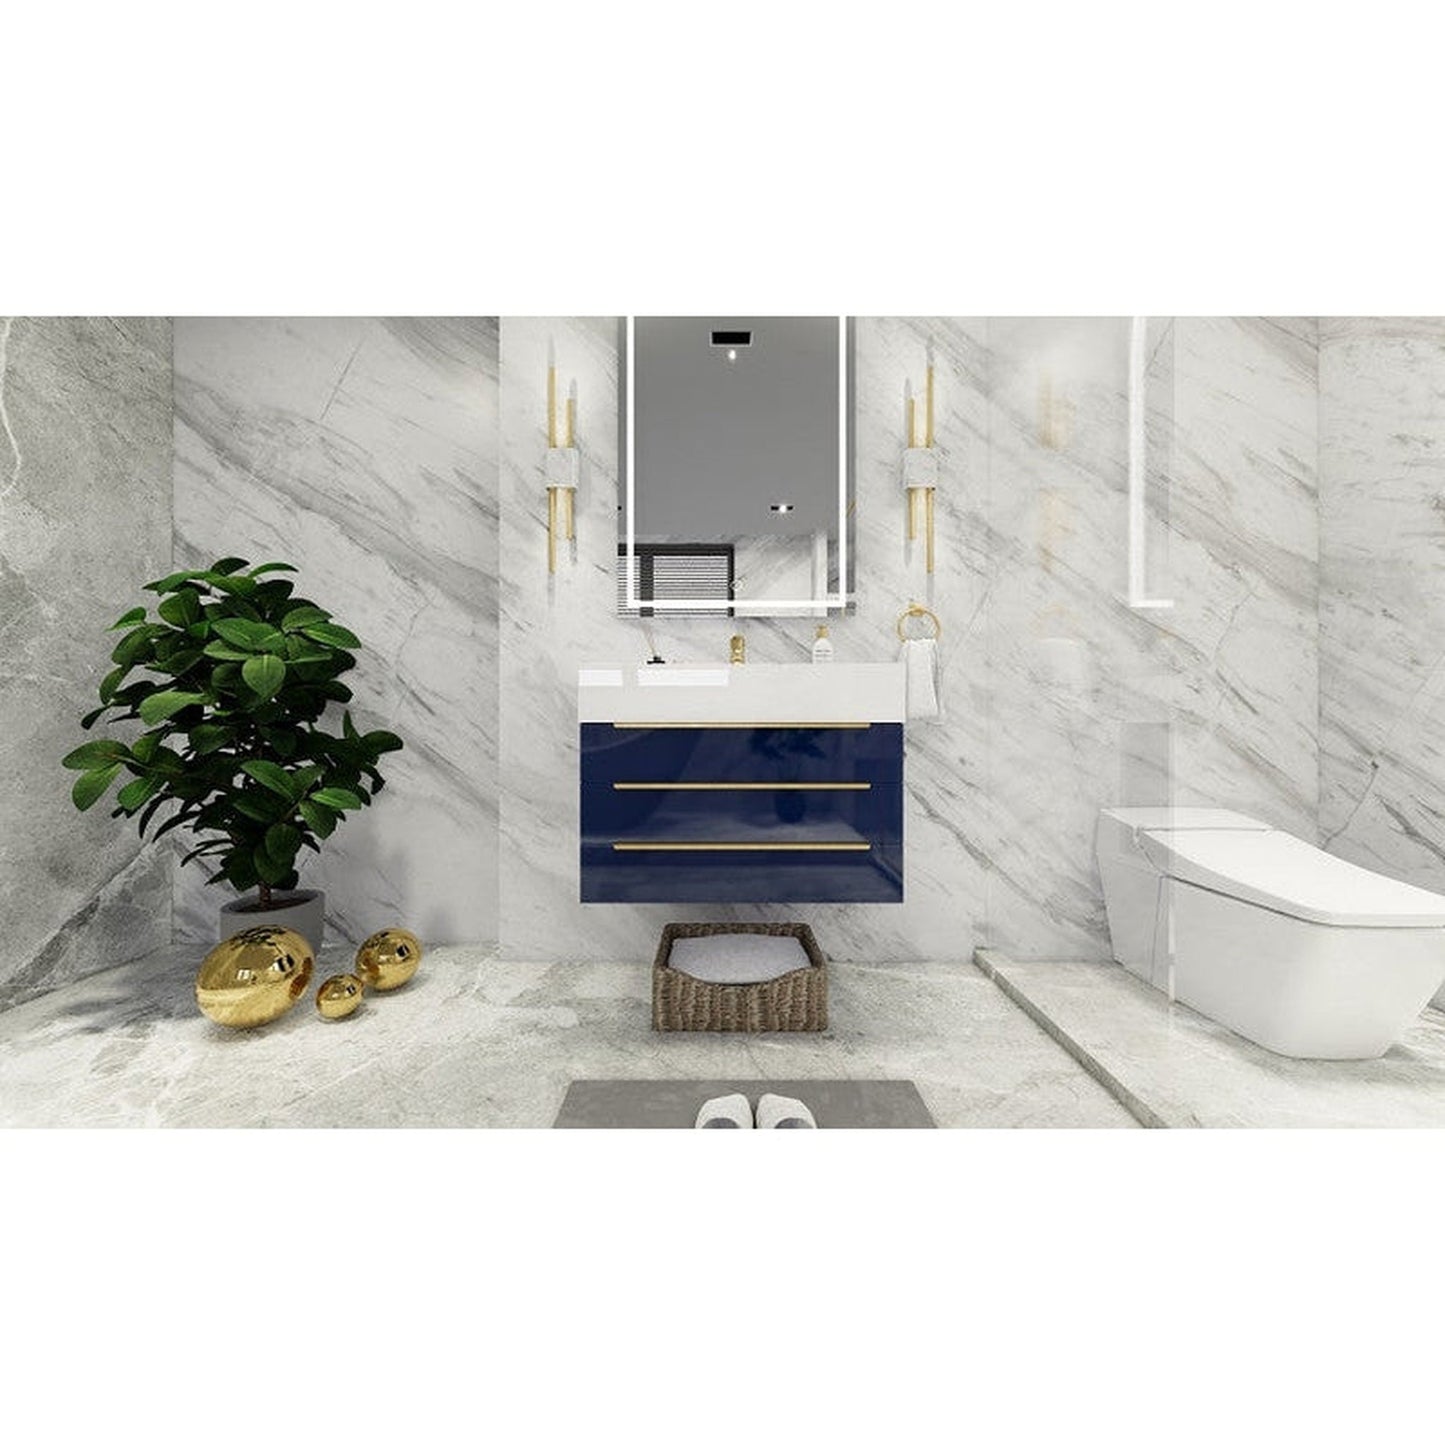 Moreno Bath Bethany 30" High Gloss Night Blue Wall-Mounted Vanity With Single Reinforced White Acrylic Sink